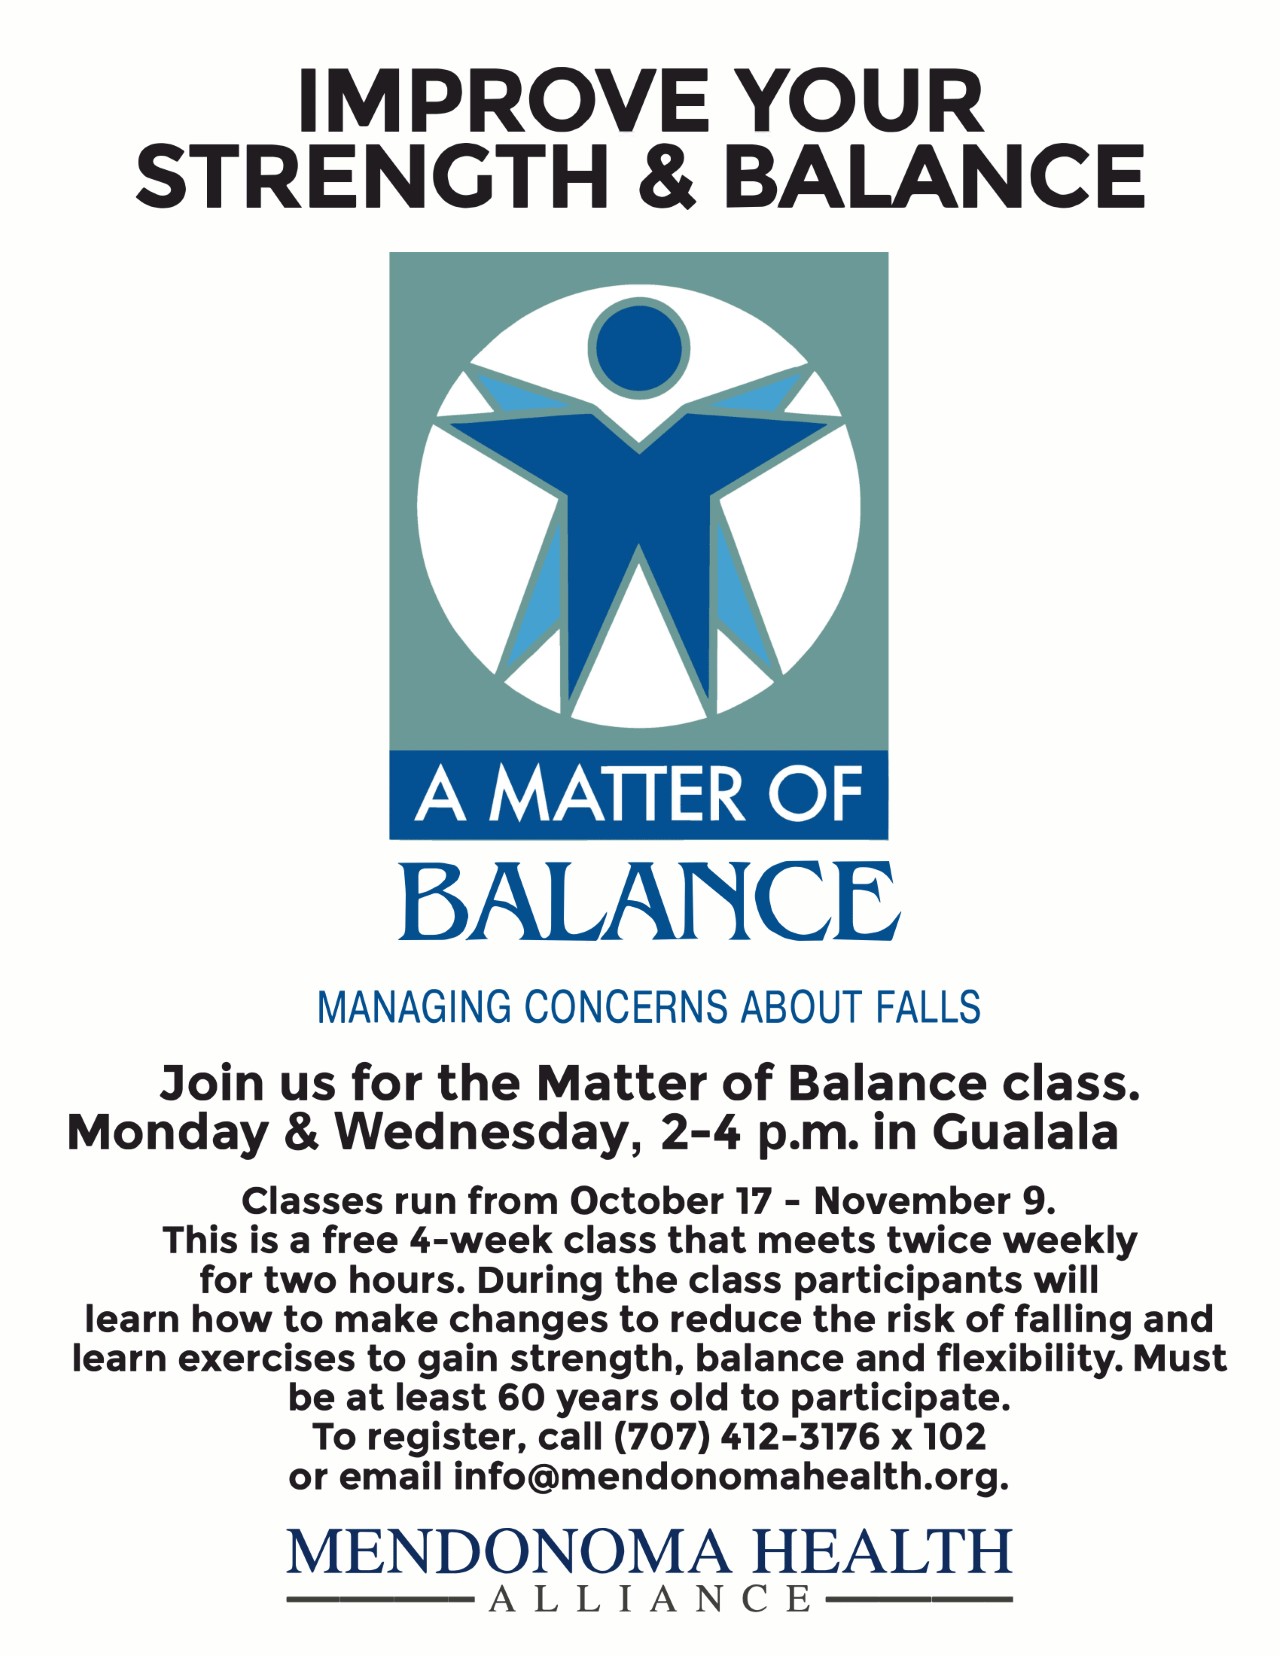 Flyer for Matter of Balance with an artistic image of someone stretching. Monday & Wednesday 2-4pm. Free in Gualala. Register (707) 412-3176 x102